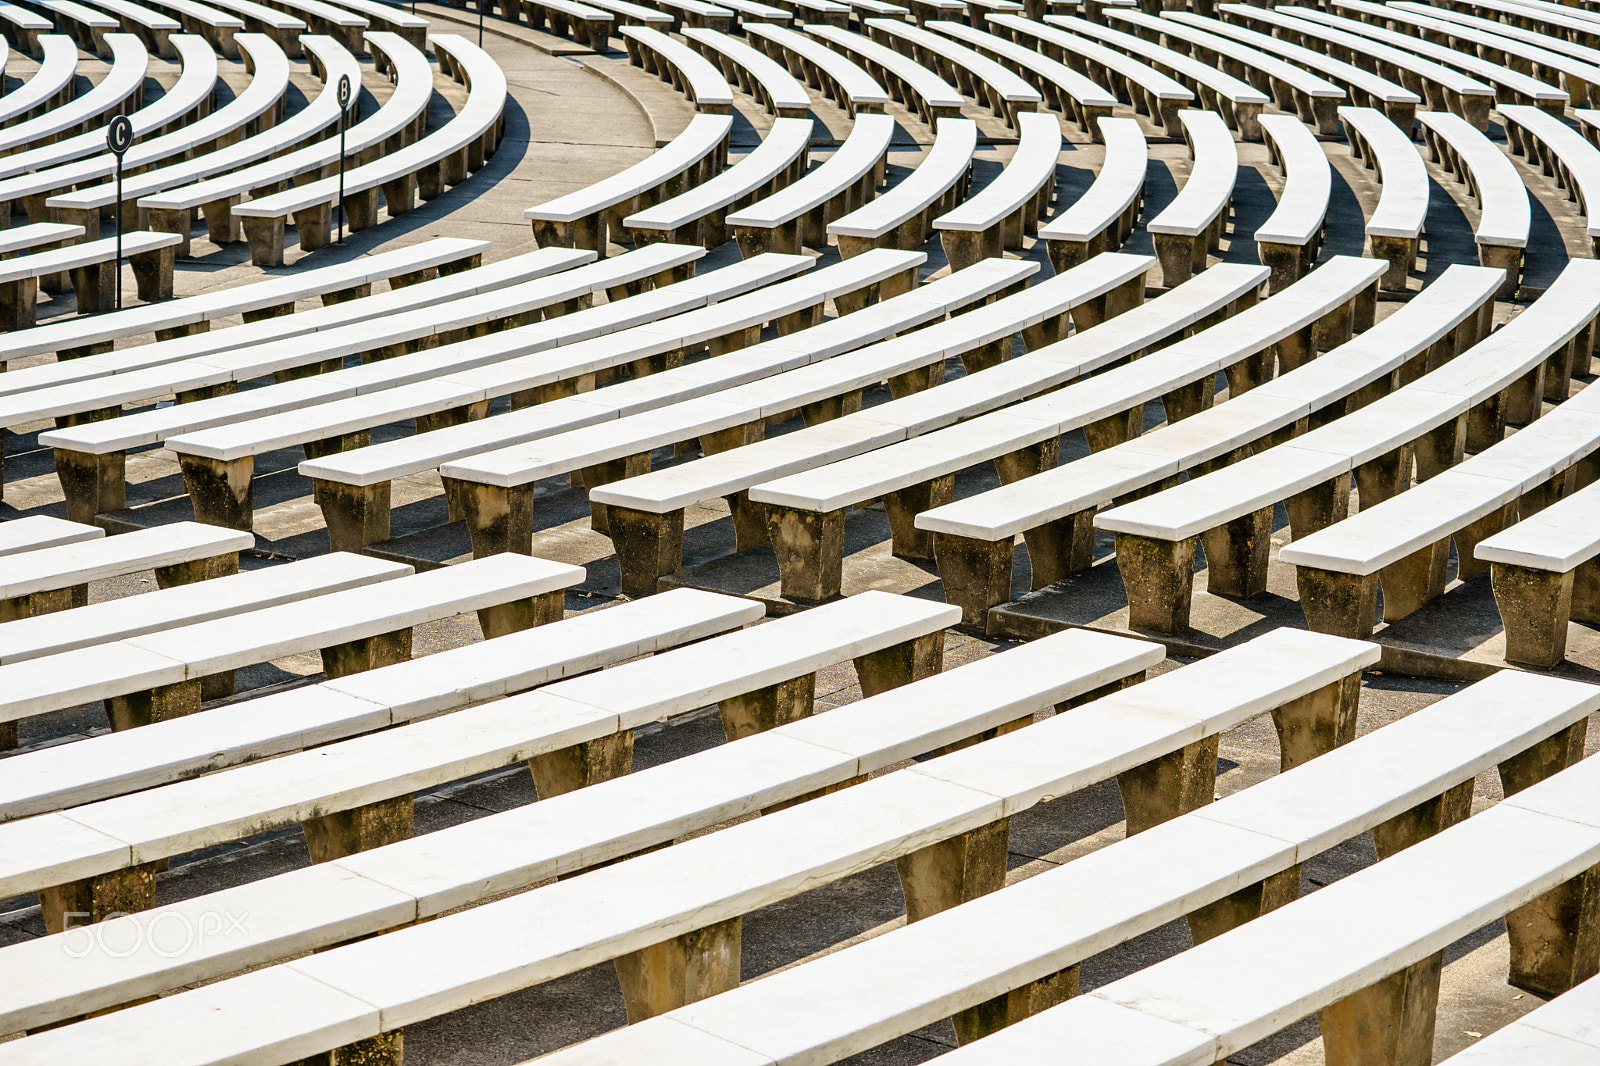 Sony a7 II + Tamron SP 70-300mm F4-5.6 Di USD sample photo. Benches in amphitheater photography